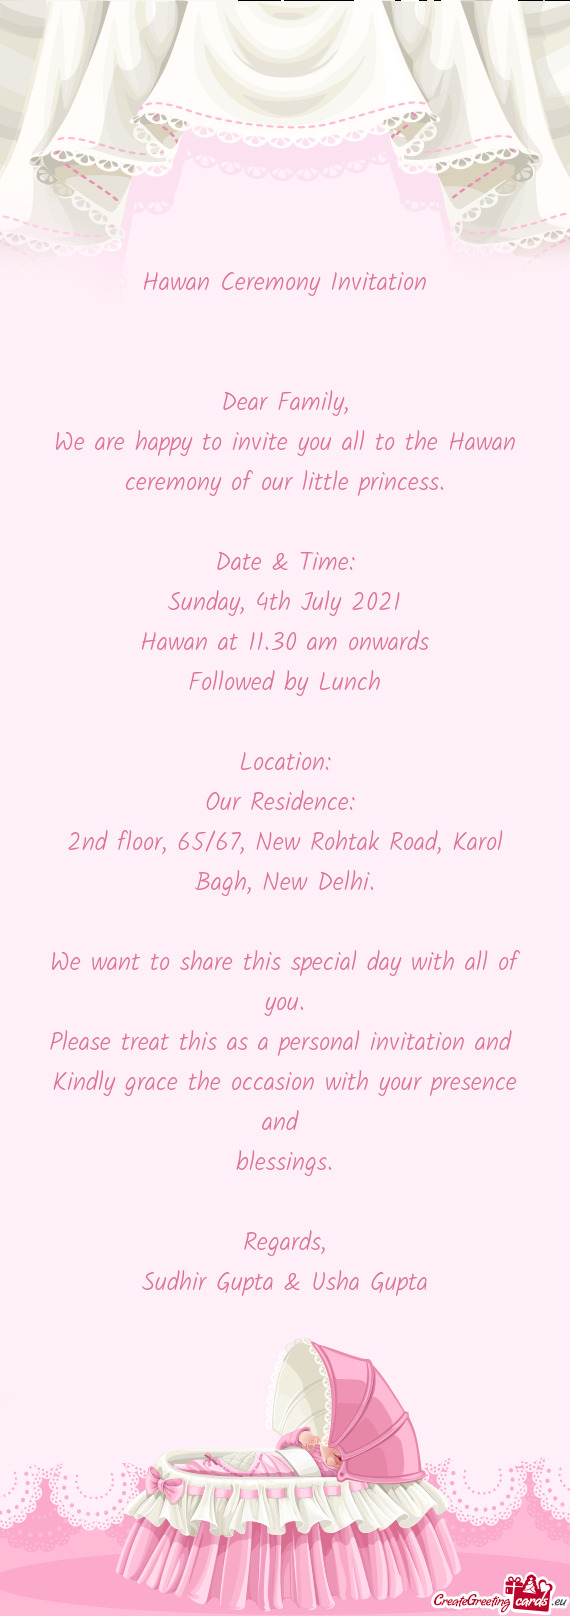 We are happy to invite you all to the Hawan ceremony of our little princess